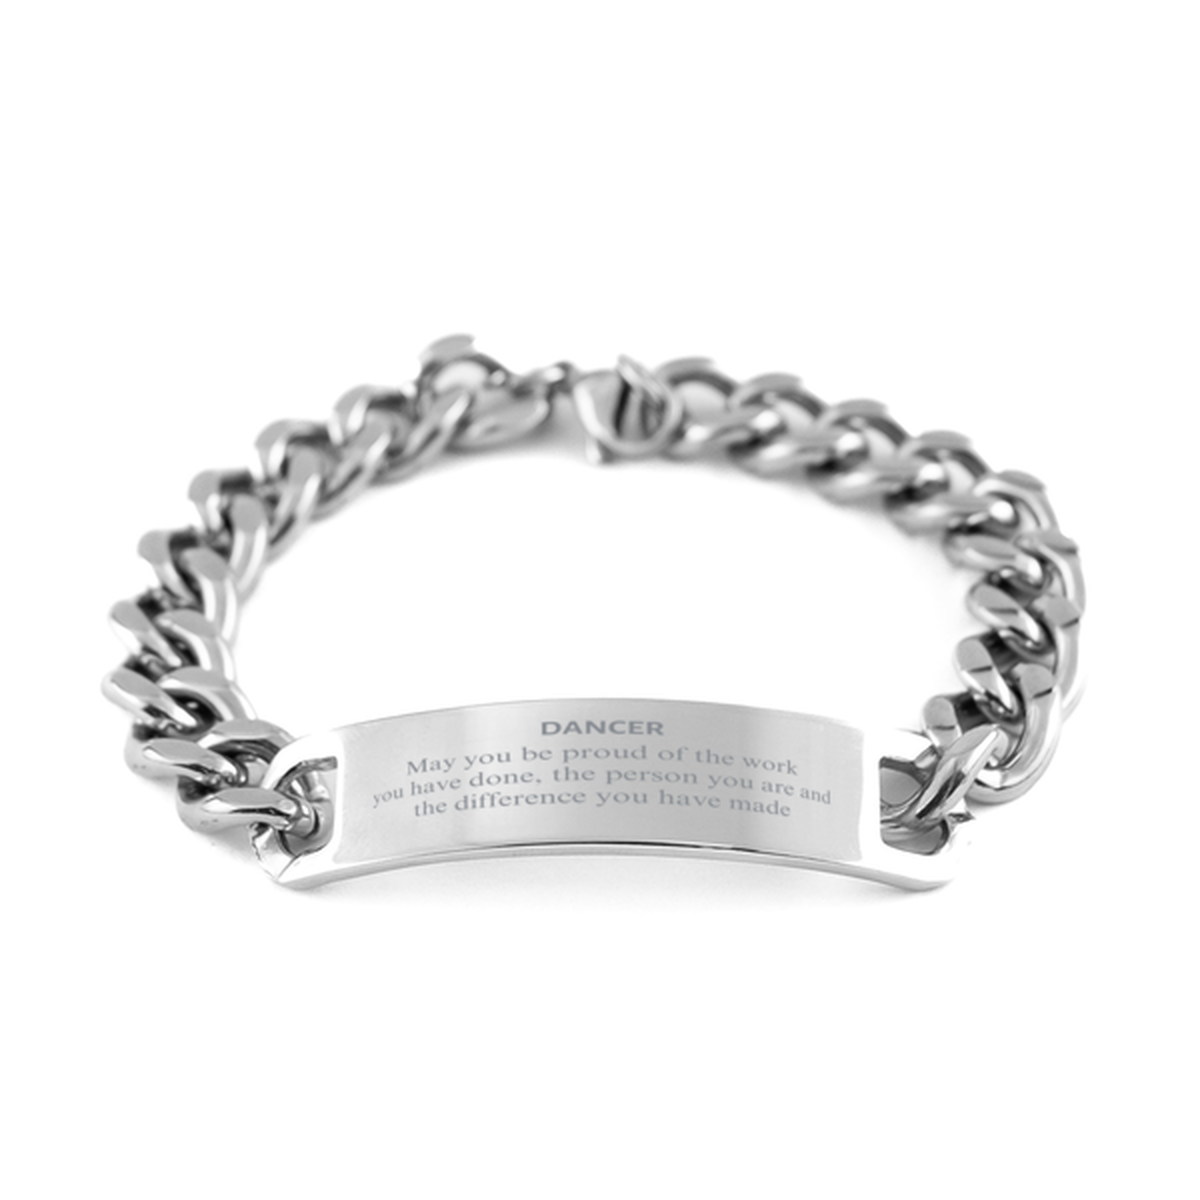 Dancer May you be proud of the work you have done, Retirement Dancer Cuban Chain Stainless Steel Bracelet for Colleague Appreciation Gifts Amazing for Dancer